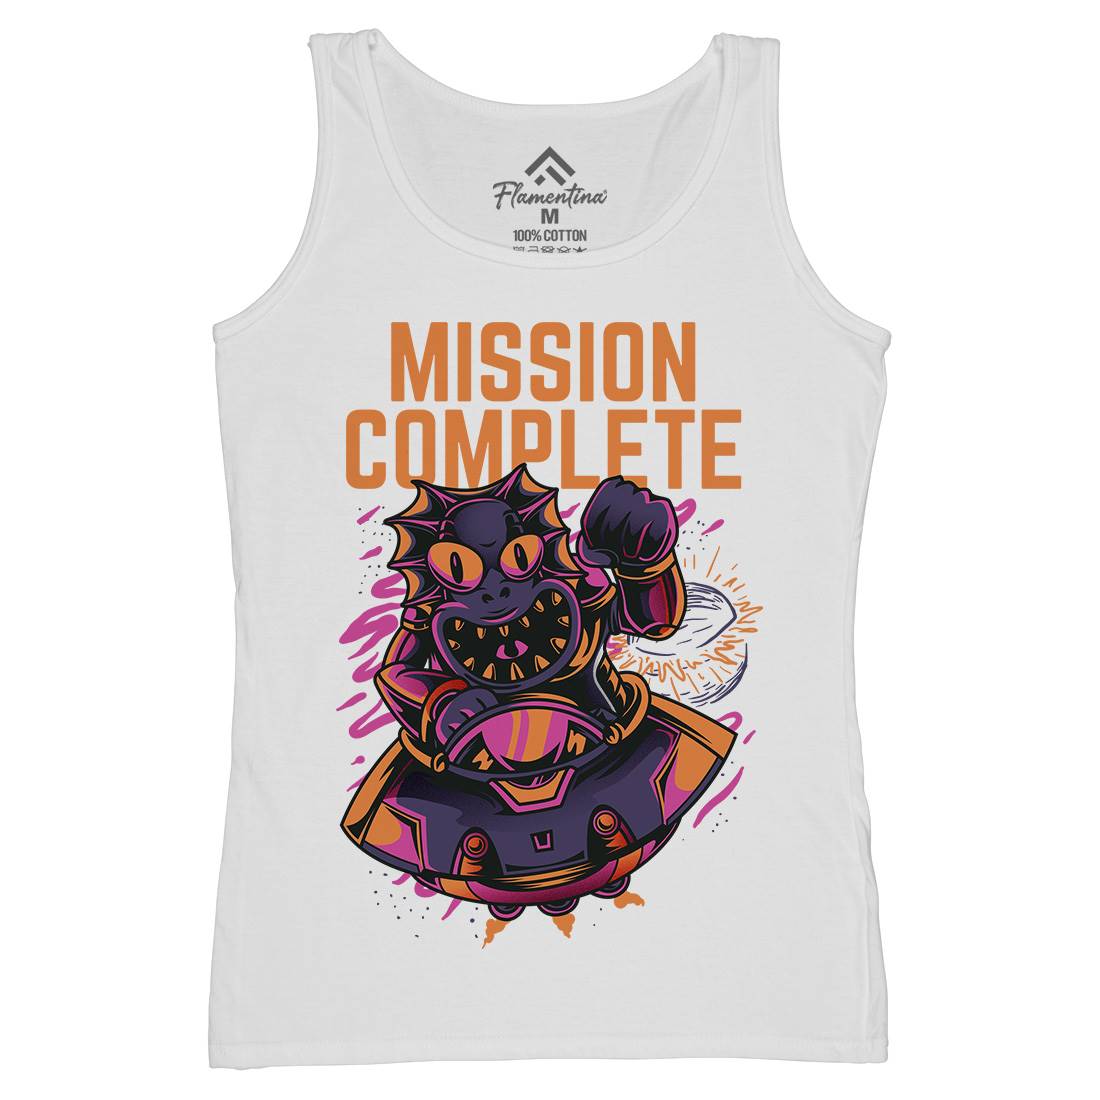 Mission Complete Womens Organic Tank Top Vest Space D655